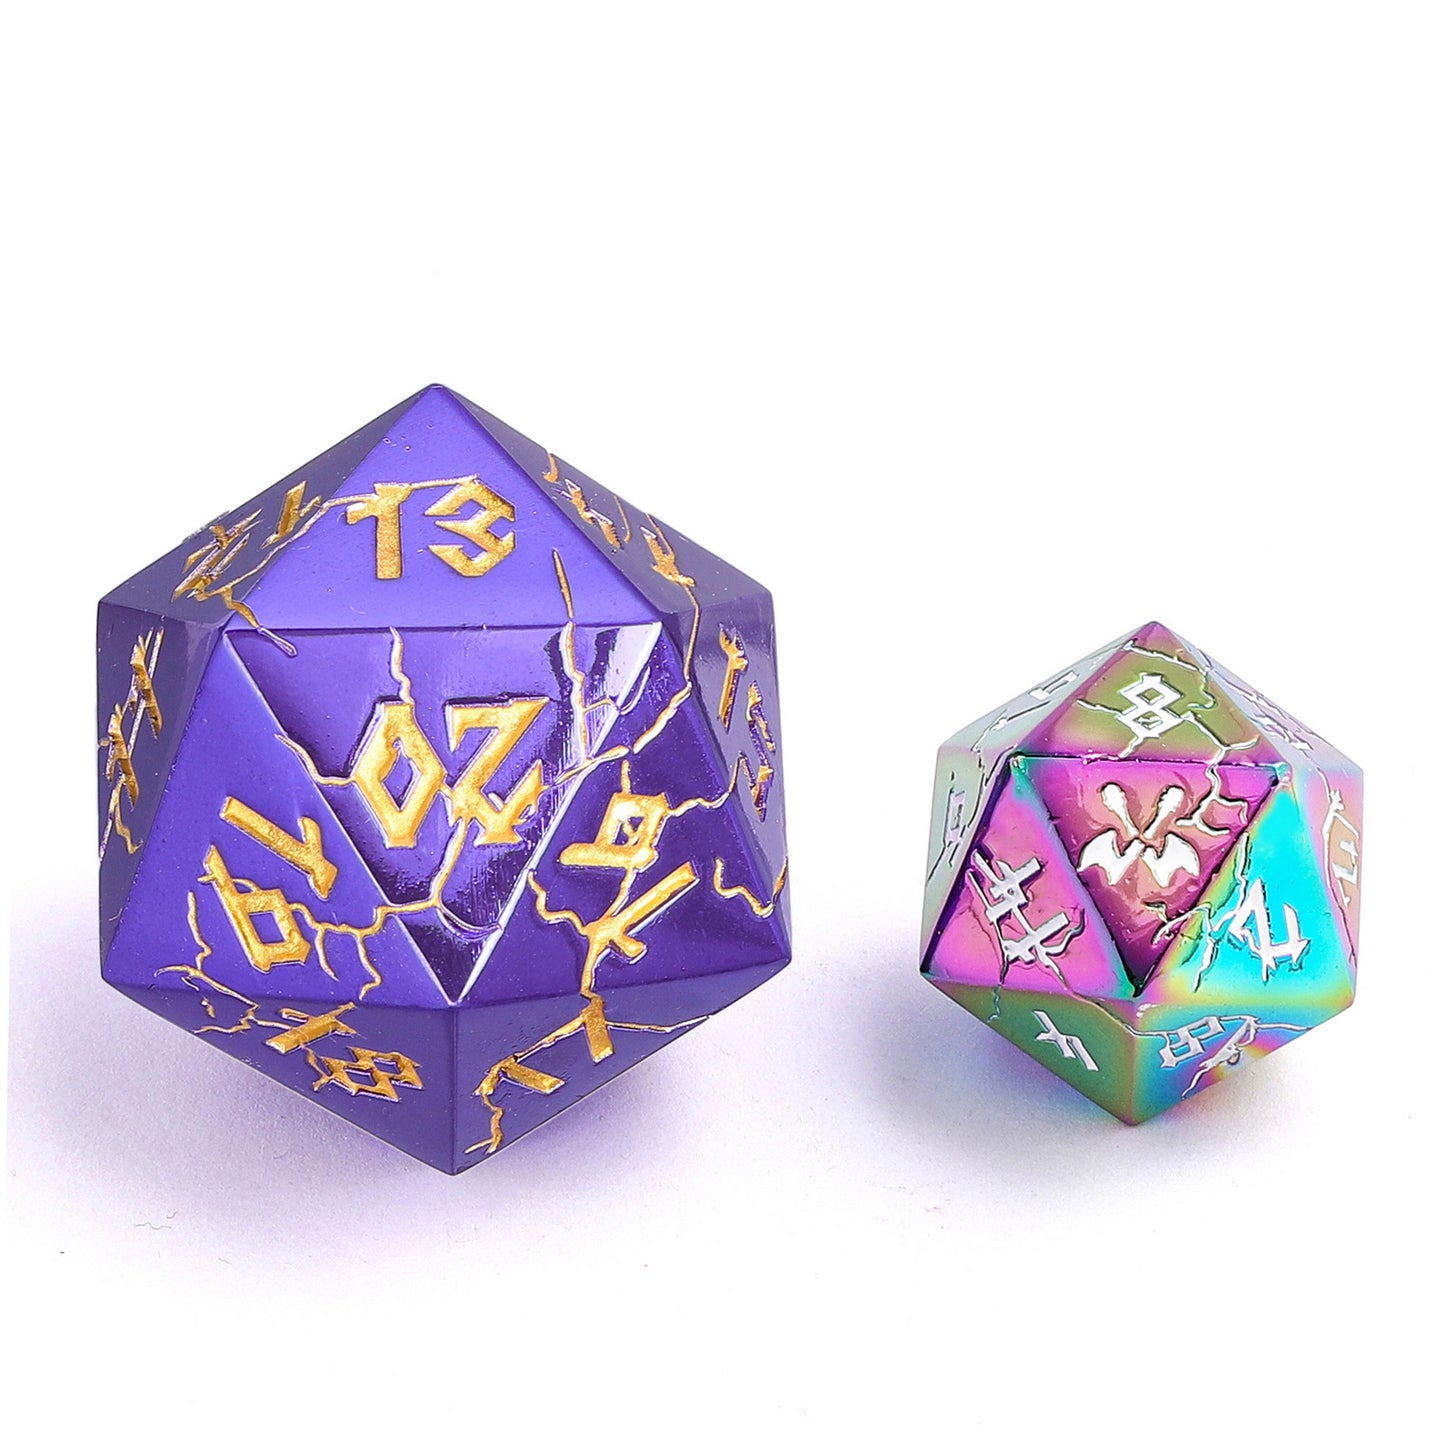 Barbarian 35mm Solid Metal Single D20 Spin Down - Purple and gold